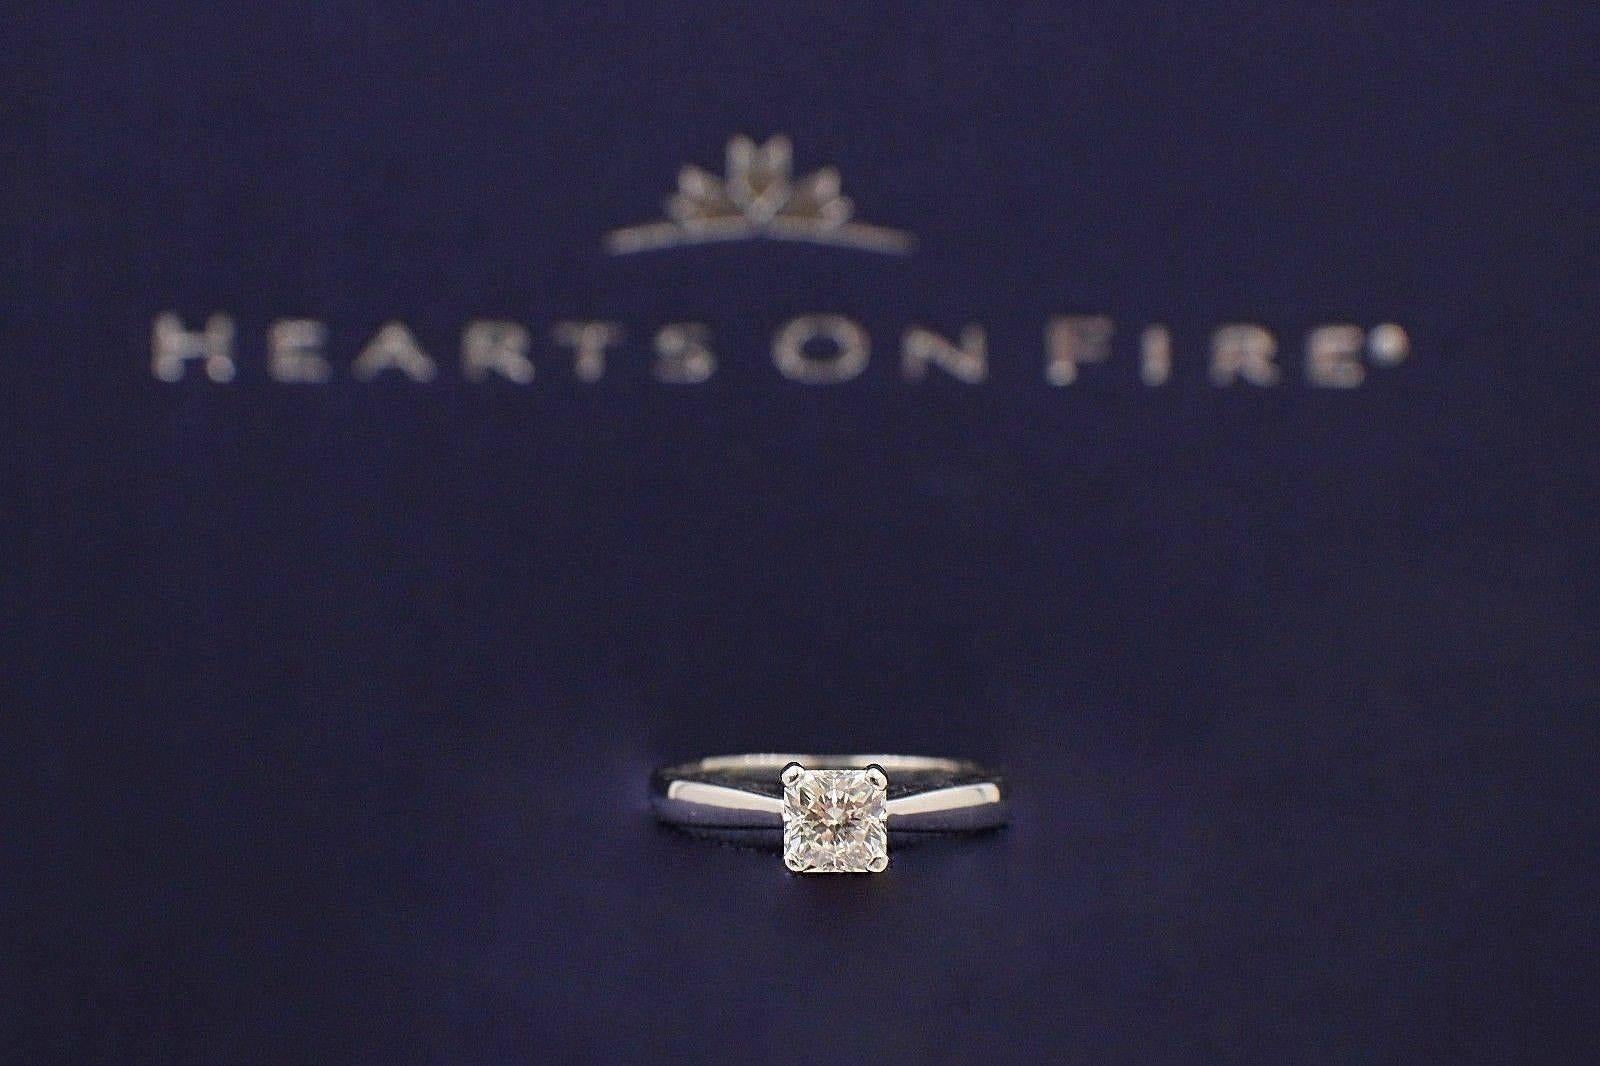 Brand:  HEARTS ON FIRE
Style:  DREAM SOLITAIRE
Serial Number:  DRM8442
Year Purchased:  2007
Metal:  PLATINUM PT950
Total Carat Weight:  0.648 CT
Diamond Shape:  SQUARE BRILLIANT DREAM
Diamond Color:  H
Diamond Clarity:  SI1
Hallmark:  HOF